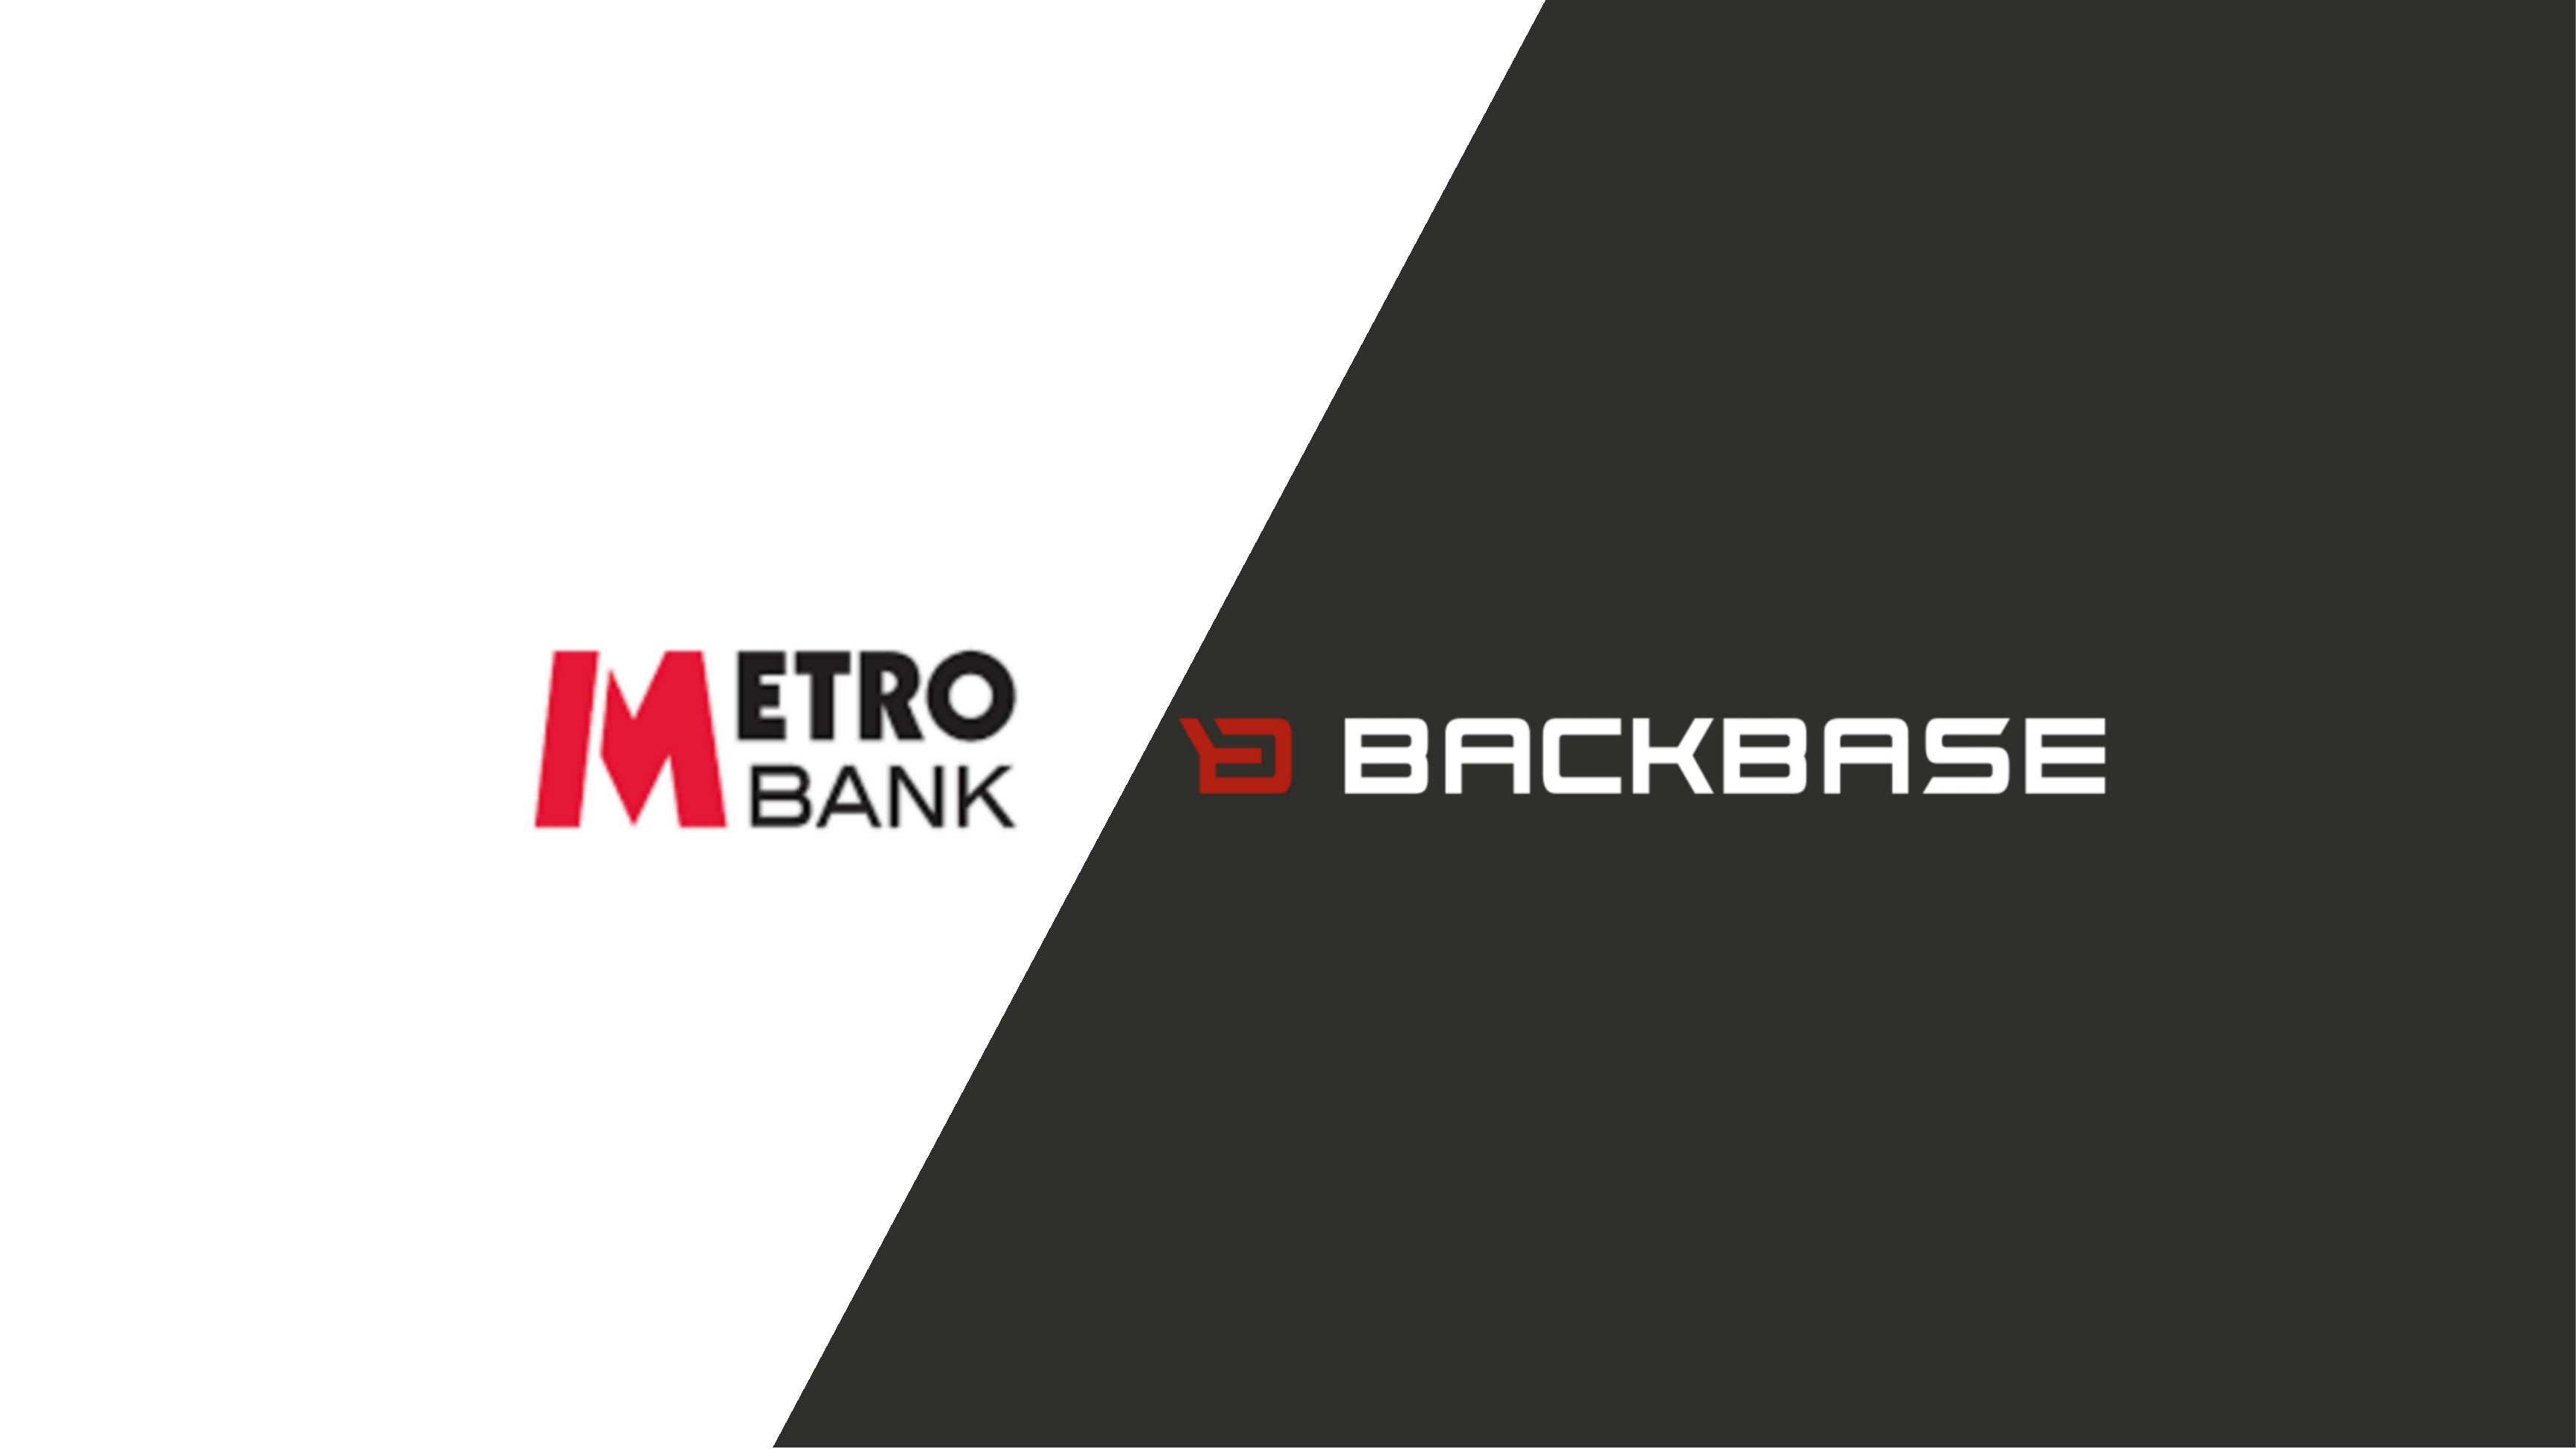 Metro Bank and Backbase Extend Strategic Partnership to Accelerate Digital Transformation